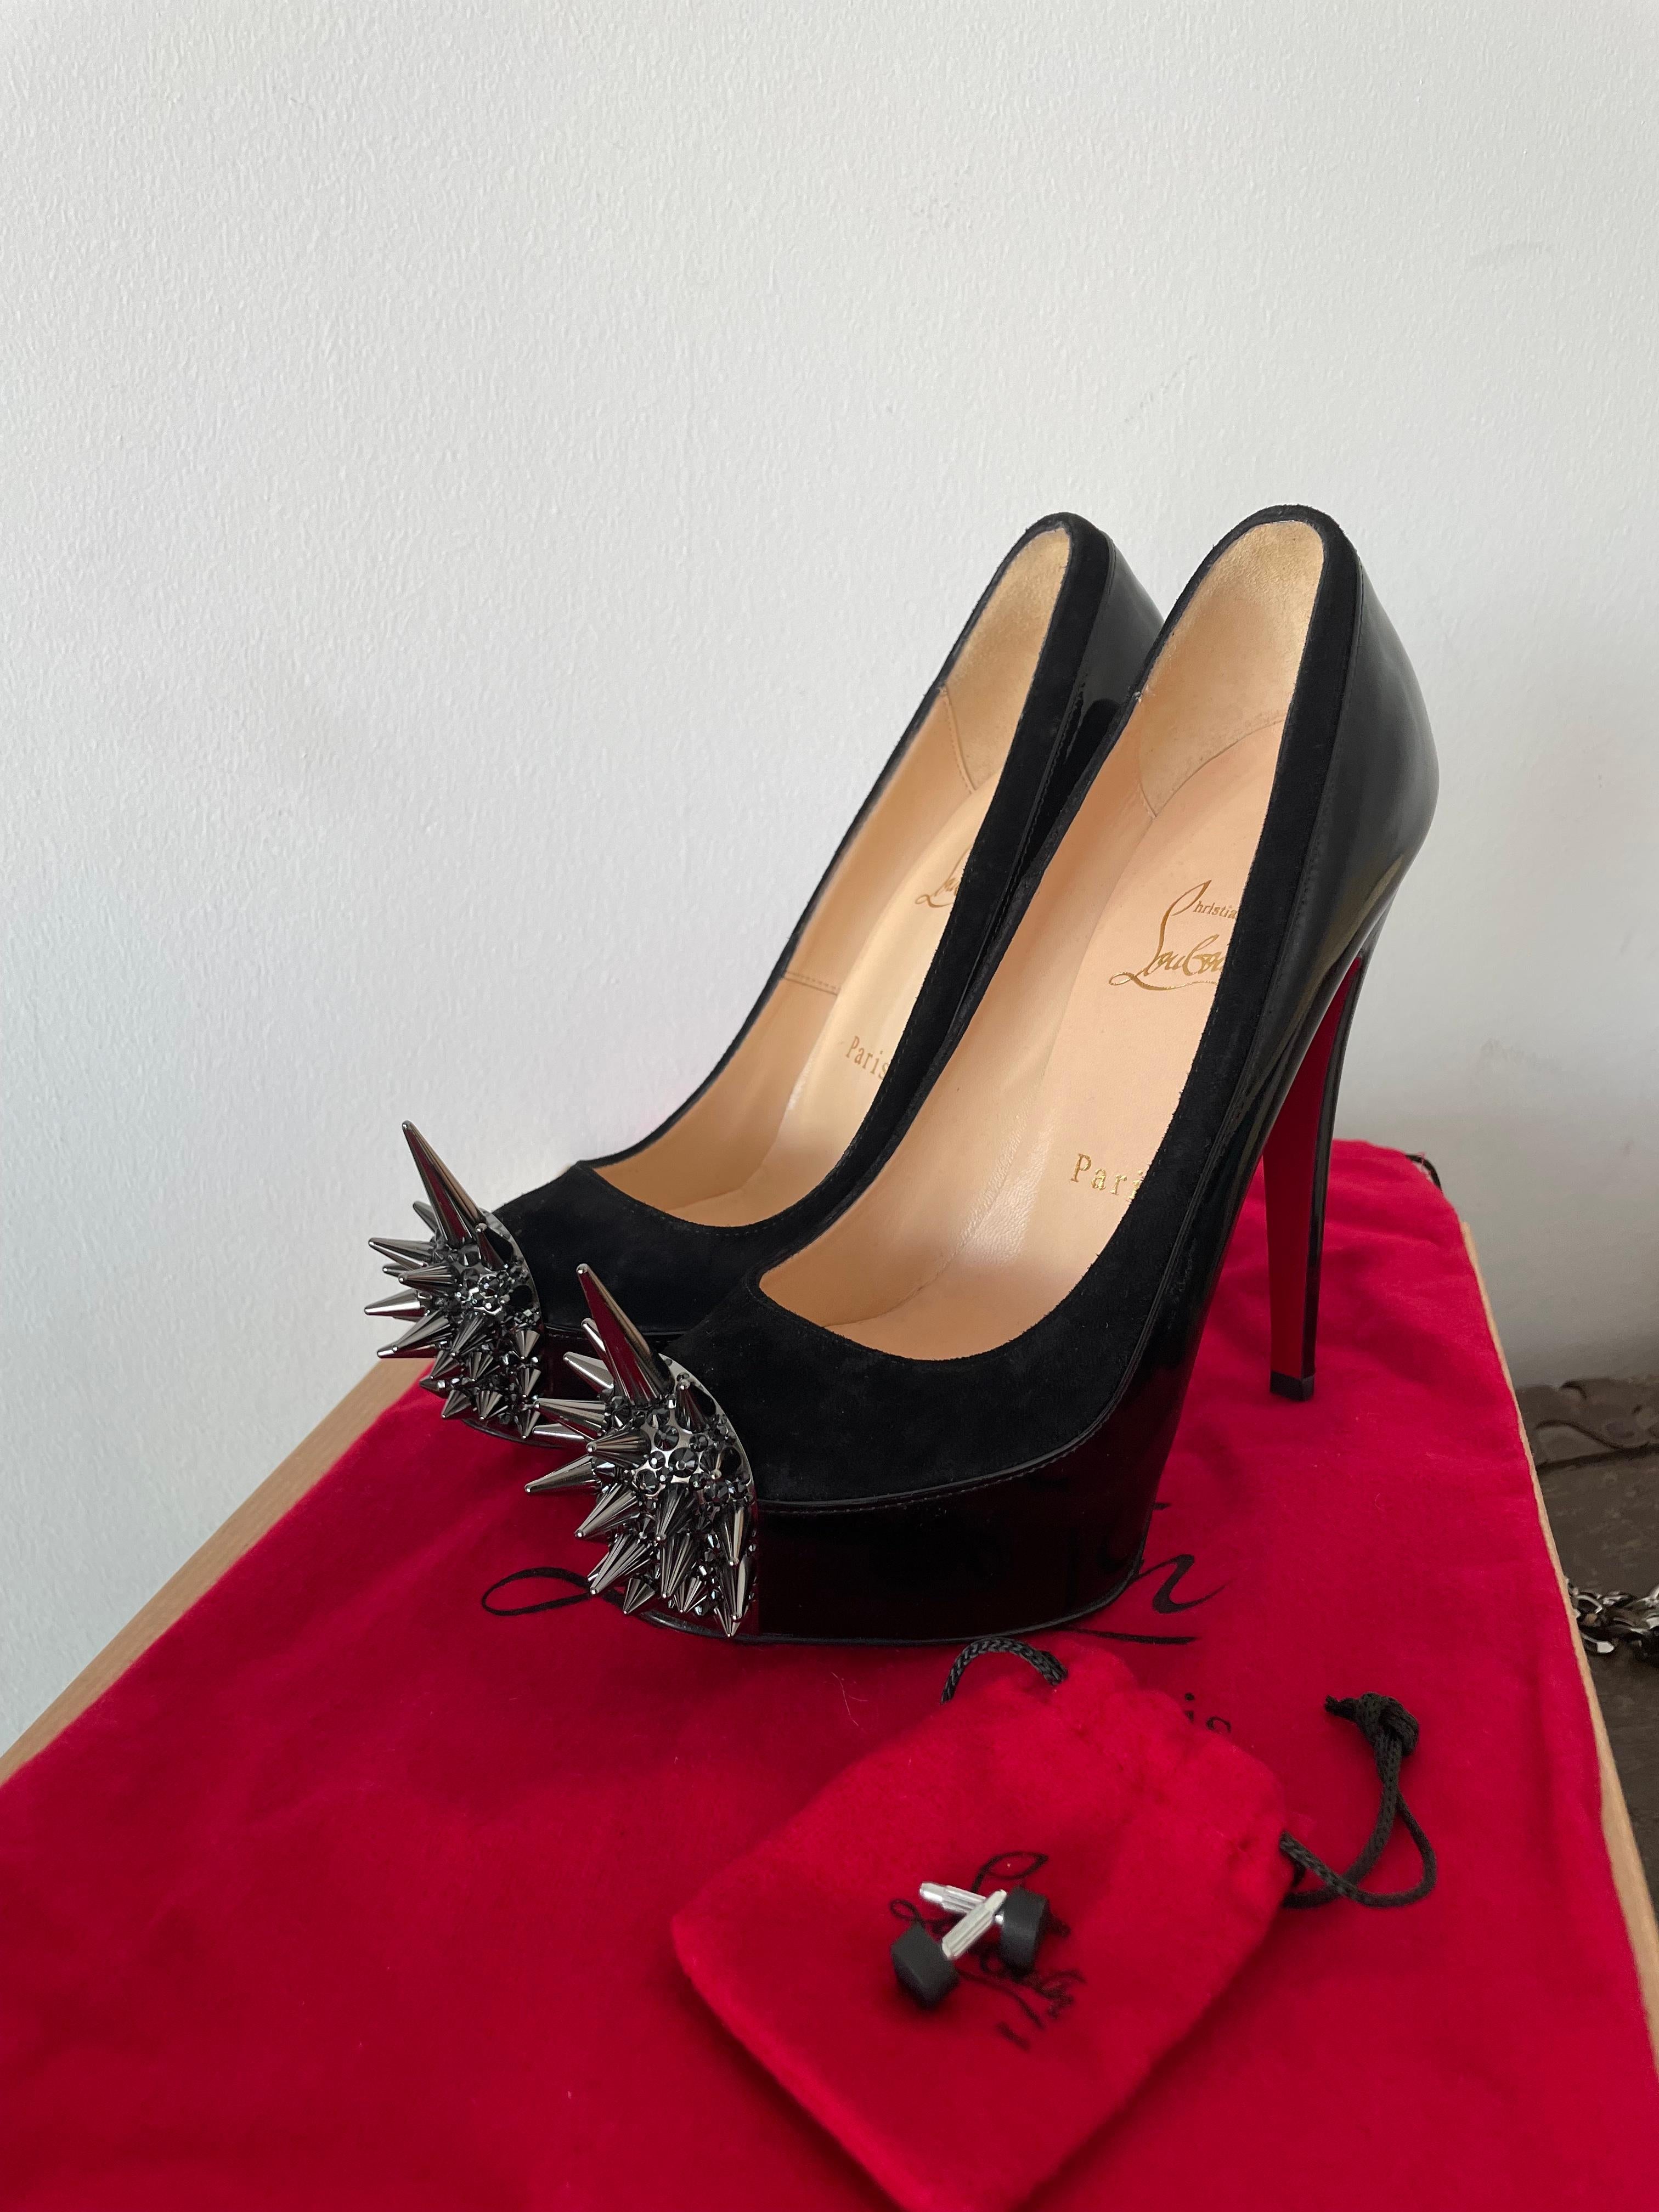 ntroducing the Christian Louboutin Asteroid 160 Spike in Black Suede and Patent Leather, a brand new and exceptional creation from the renowned luxury brand. This stunning shoe is truly special and worth the investment due to its unique design,